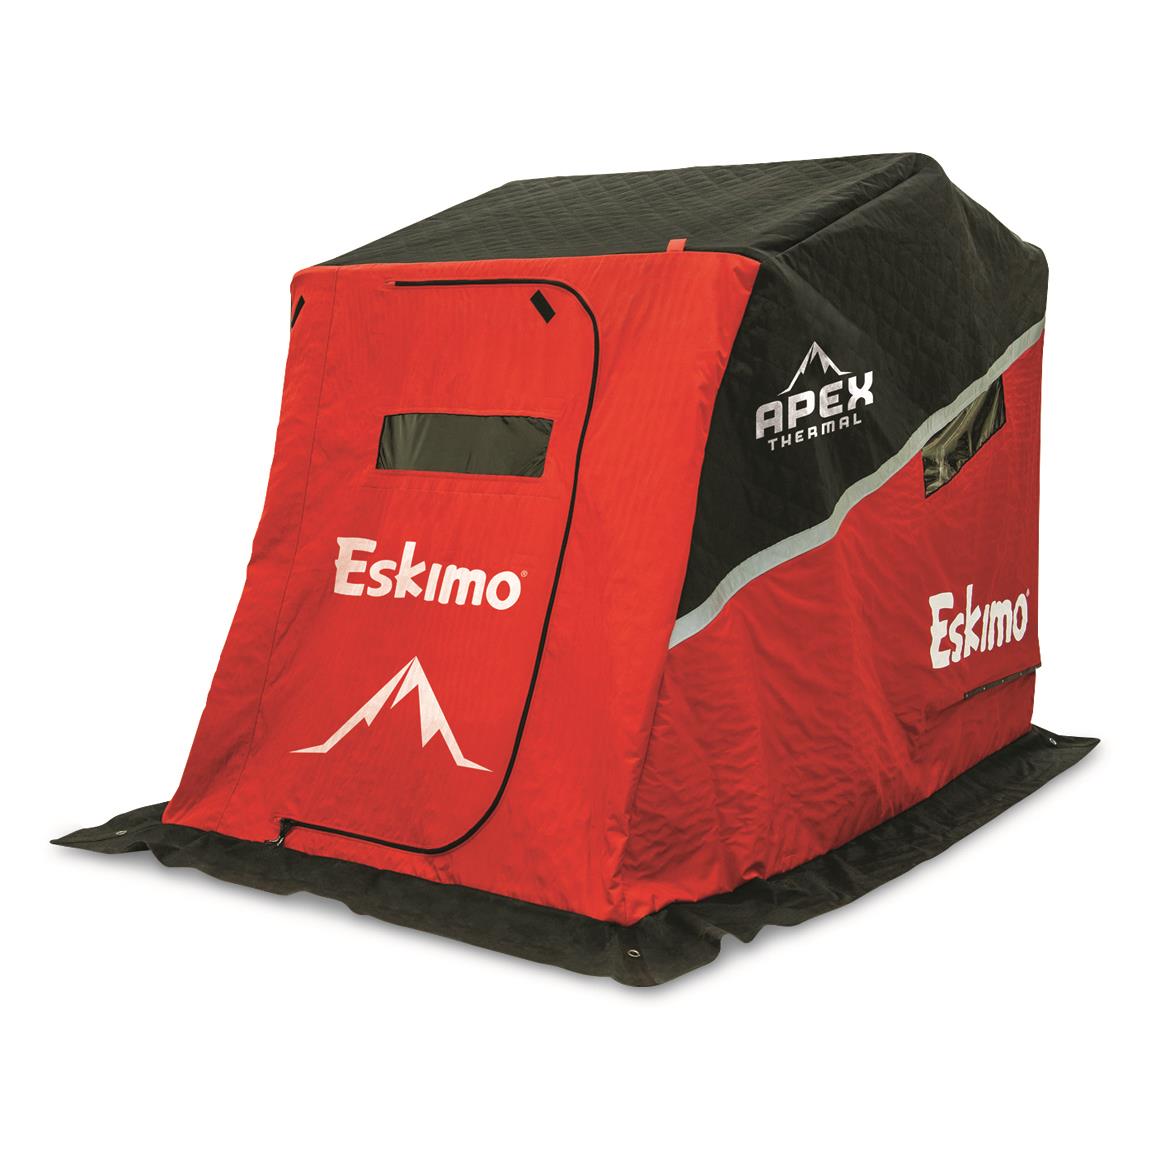 Eskimo Apex Thermal Insulated Ice Shelter 711876, Ice